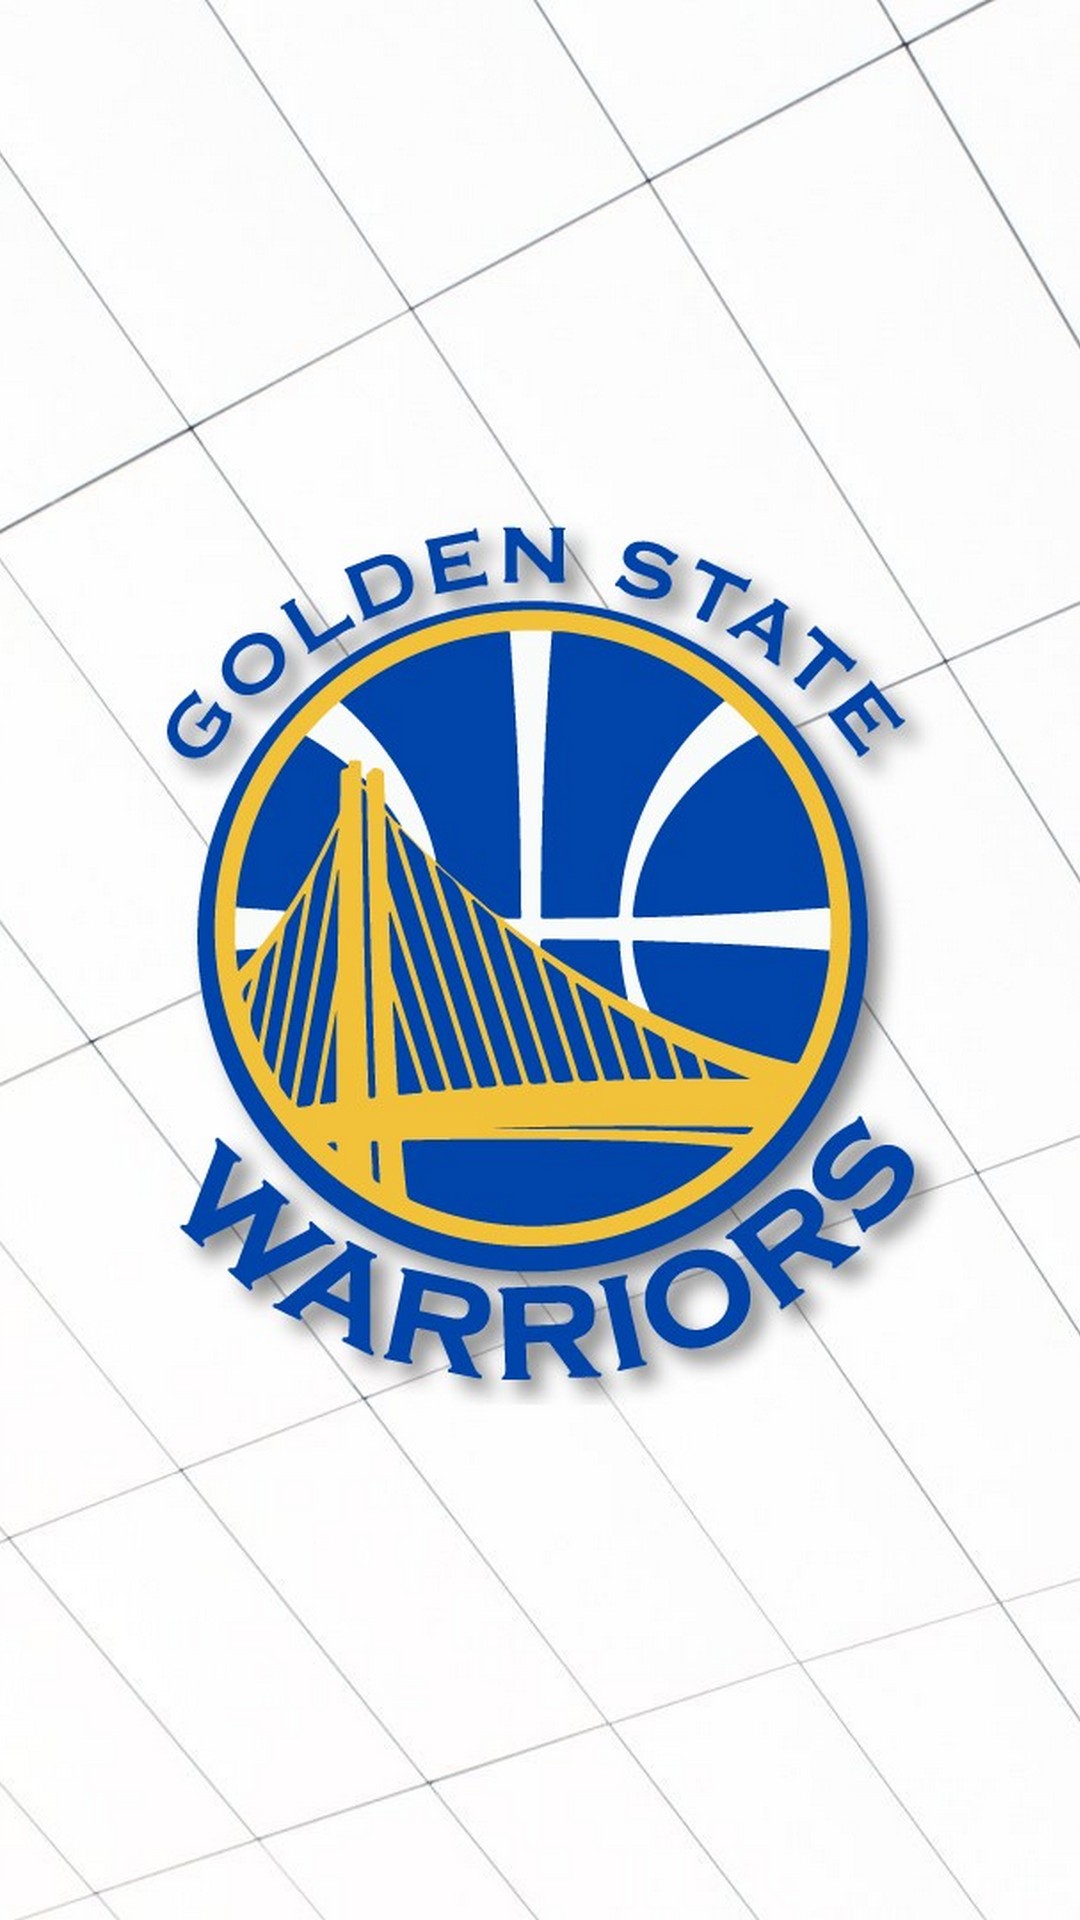 Golden State Warriors HD Wallpapers For Mobile with image dimensions 1080x1920 pixel. You can make this wallpaper for your Desktop Computer Backgrounds, Windows or Mac Screensavers, iPhone Lock screen, Tablet or Android and another Mobile Phone device